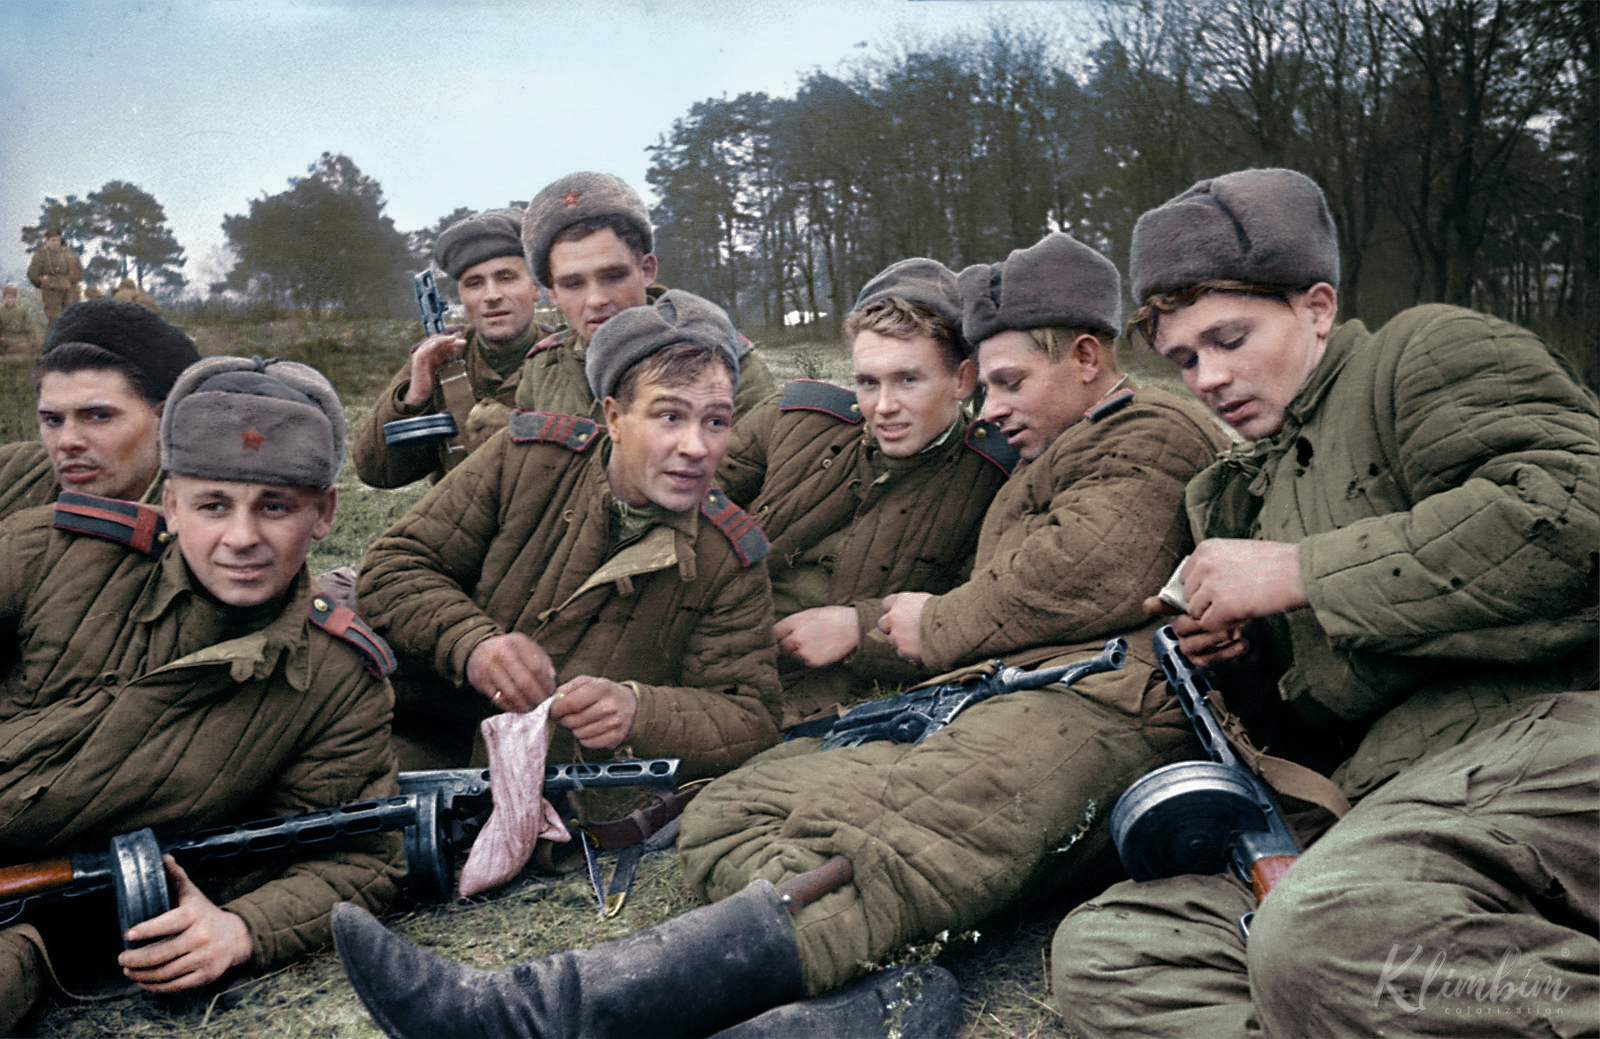 Red Army Soldiers Ww2